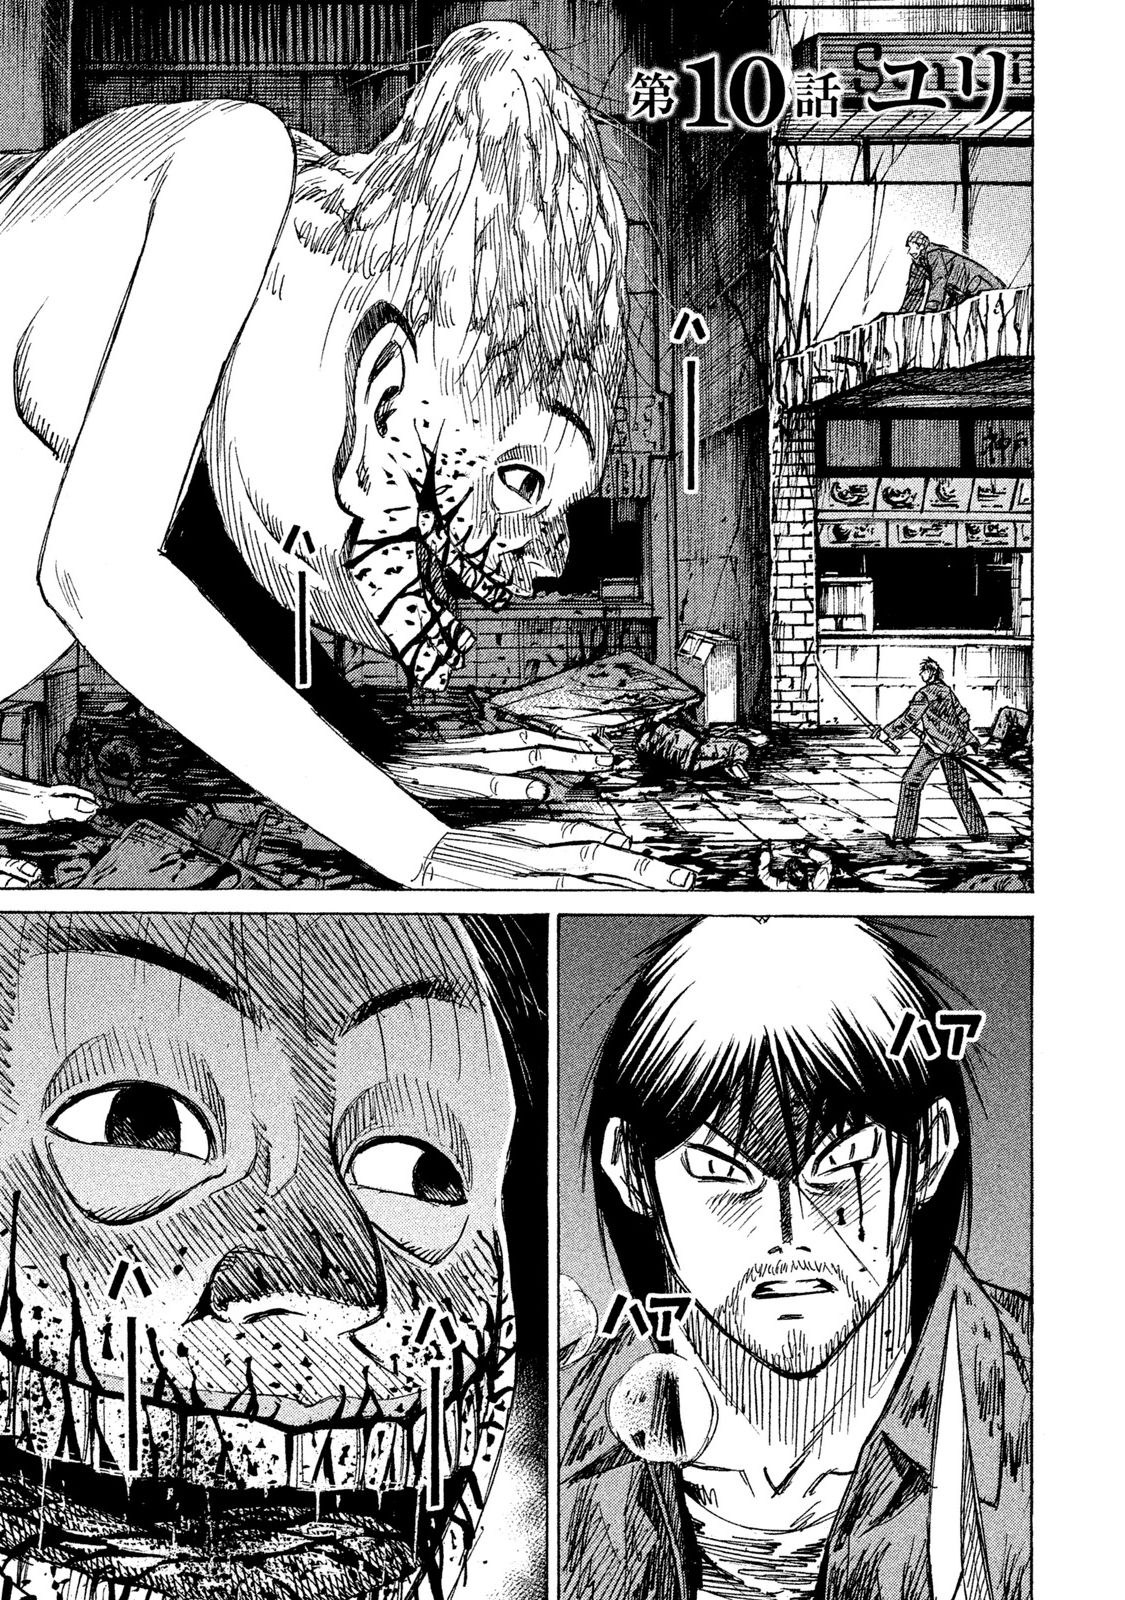 Higanjima - 48 Days Later Vol.2 Chapter 10: The Yuria - Picture 1